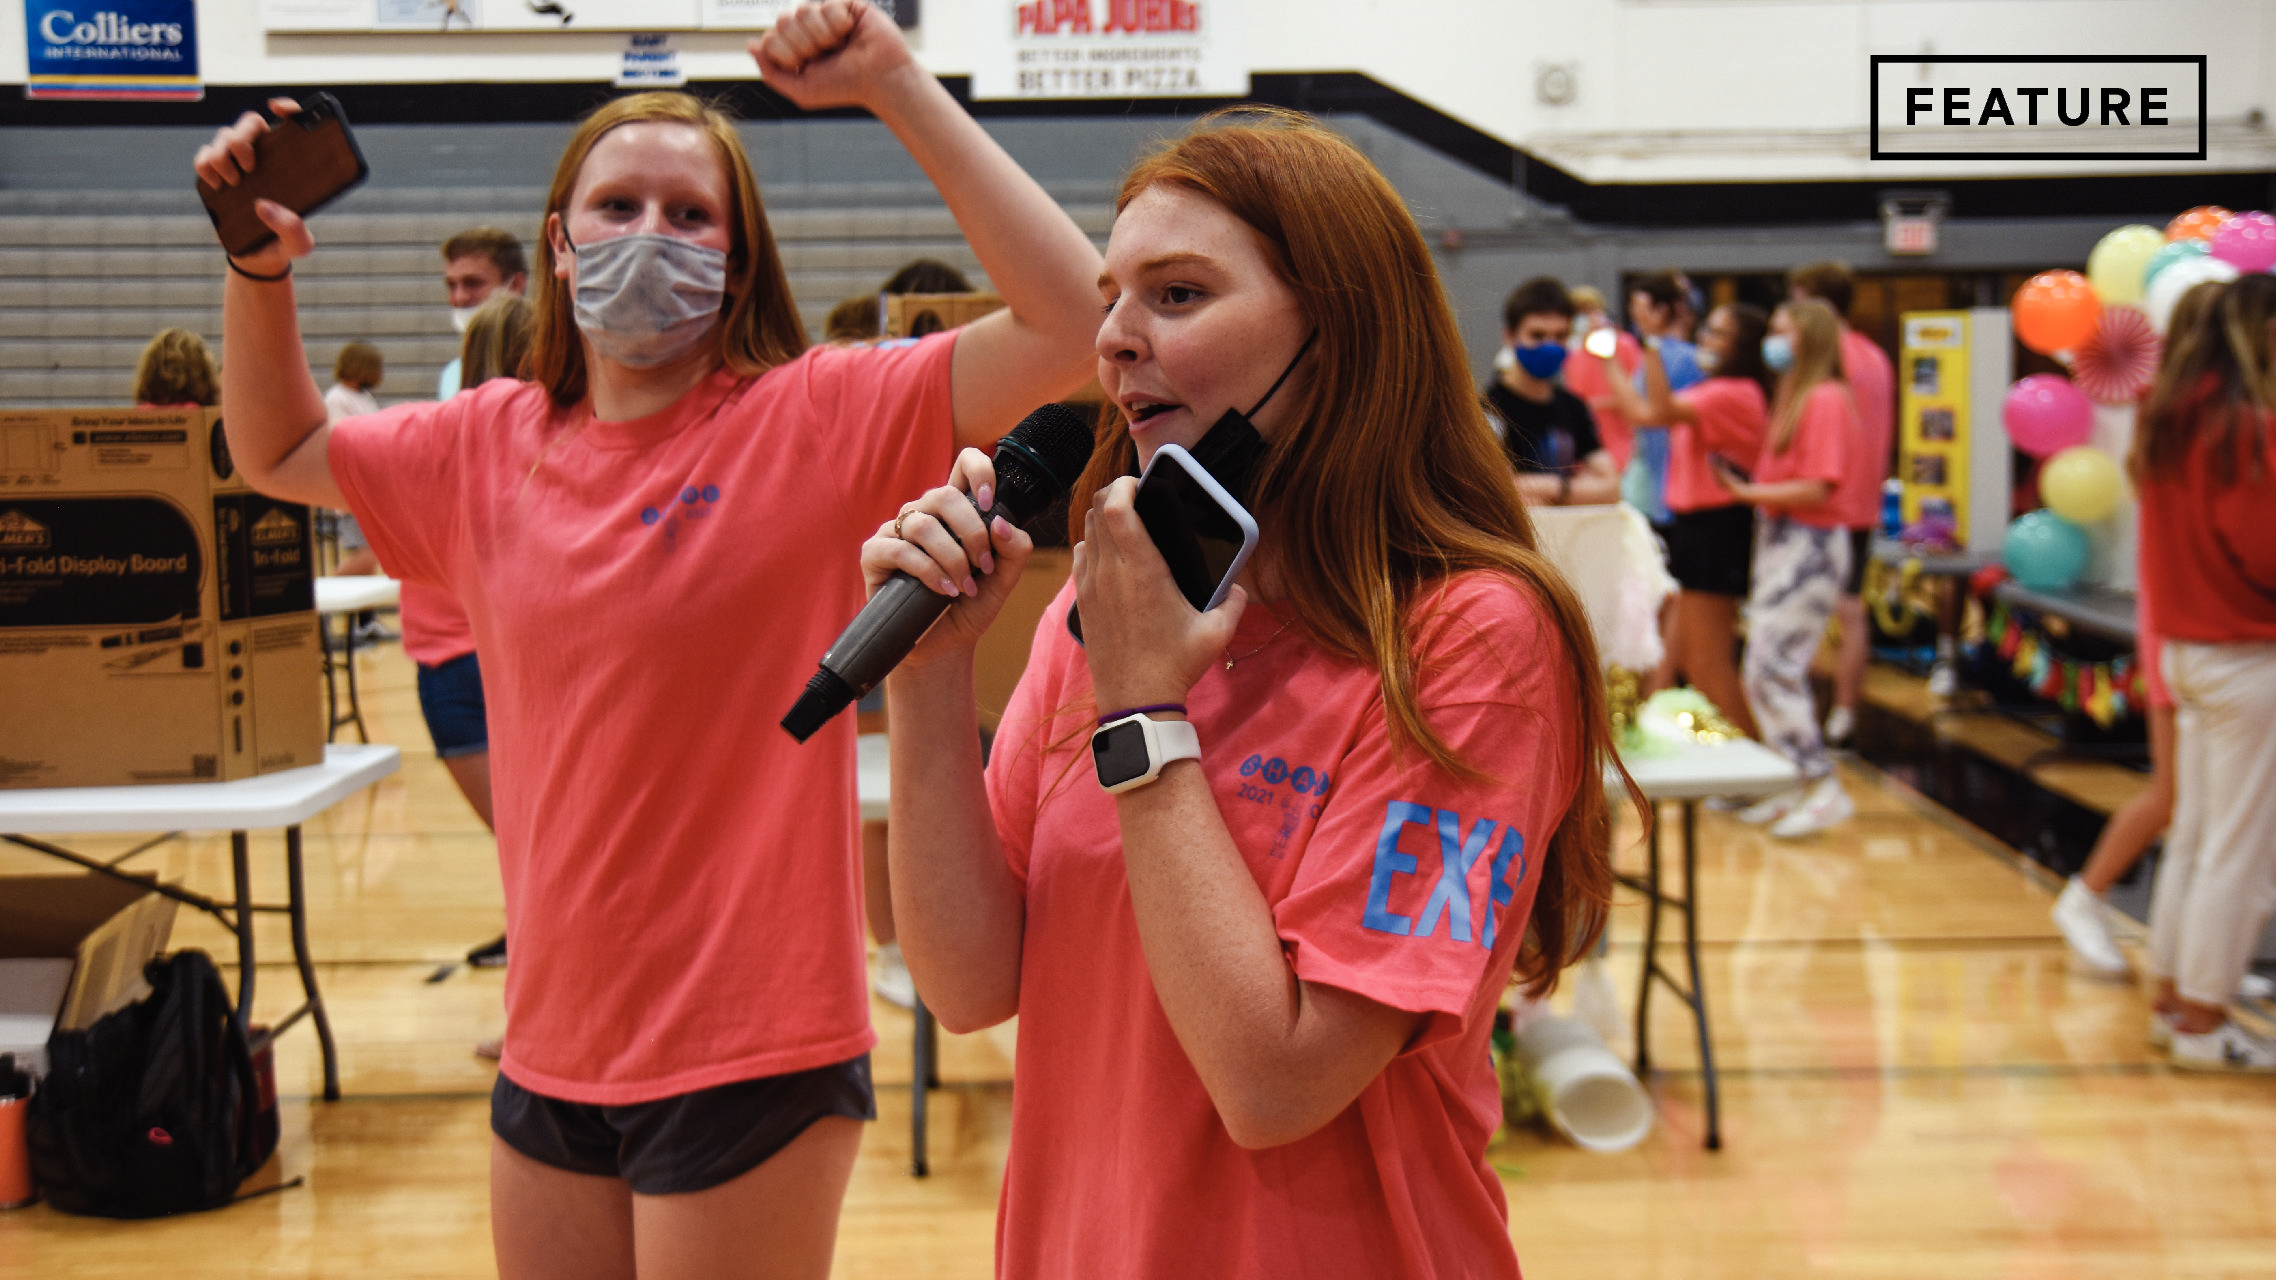 Issue 1 Feature Highlights: Student life and a look at Lancer Day